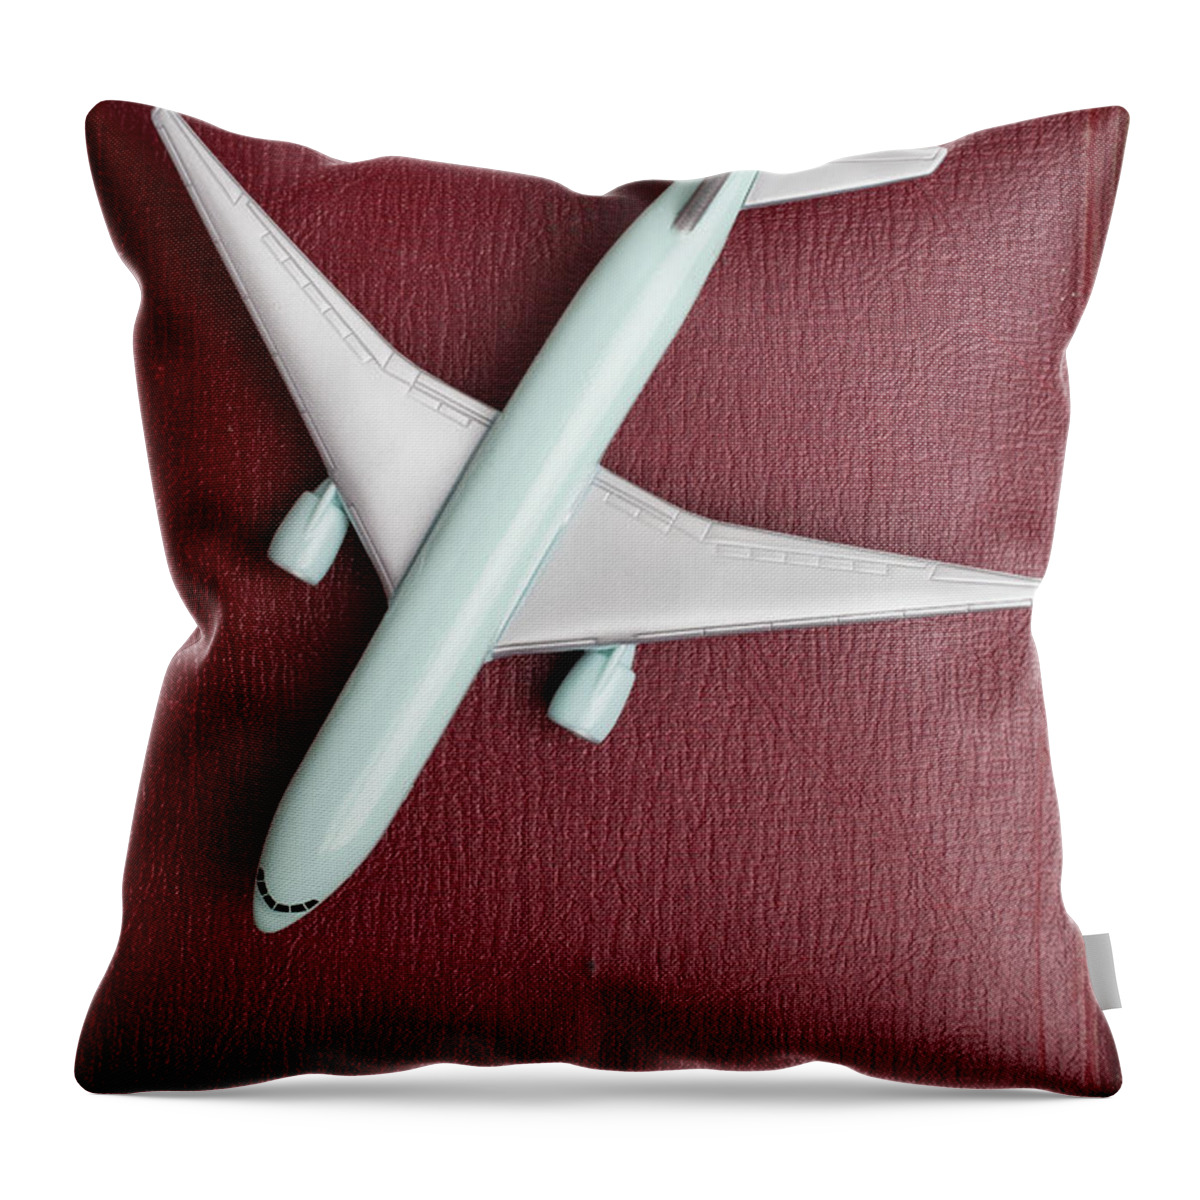 Still Life Throw Pillow featuring the photograph Toy Airplane over Red Book Cover by Edward Fielding